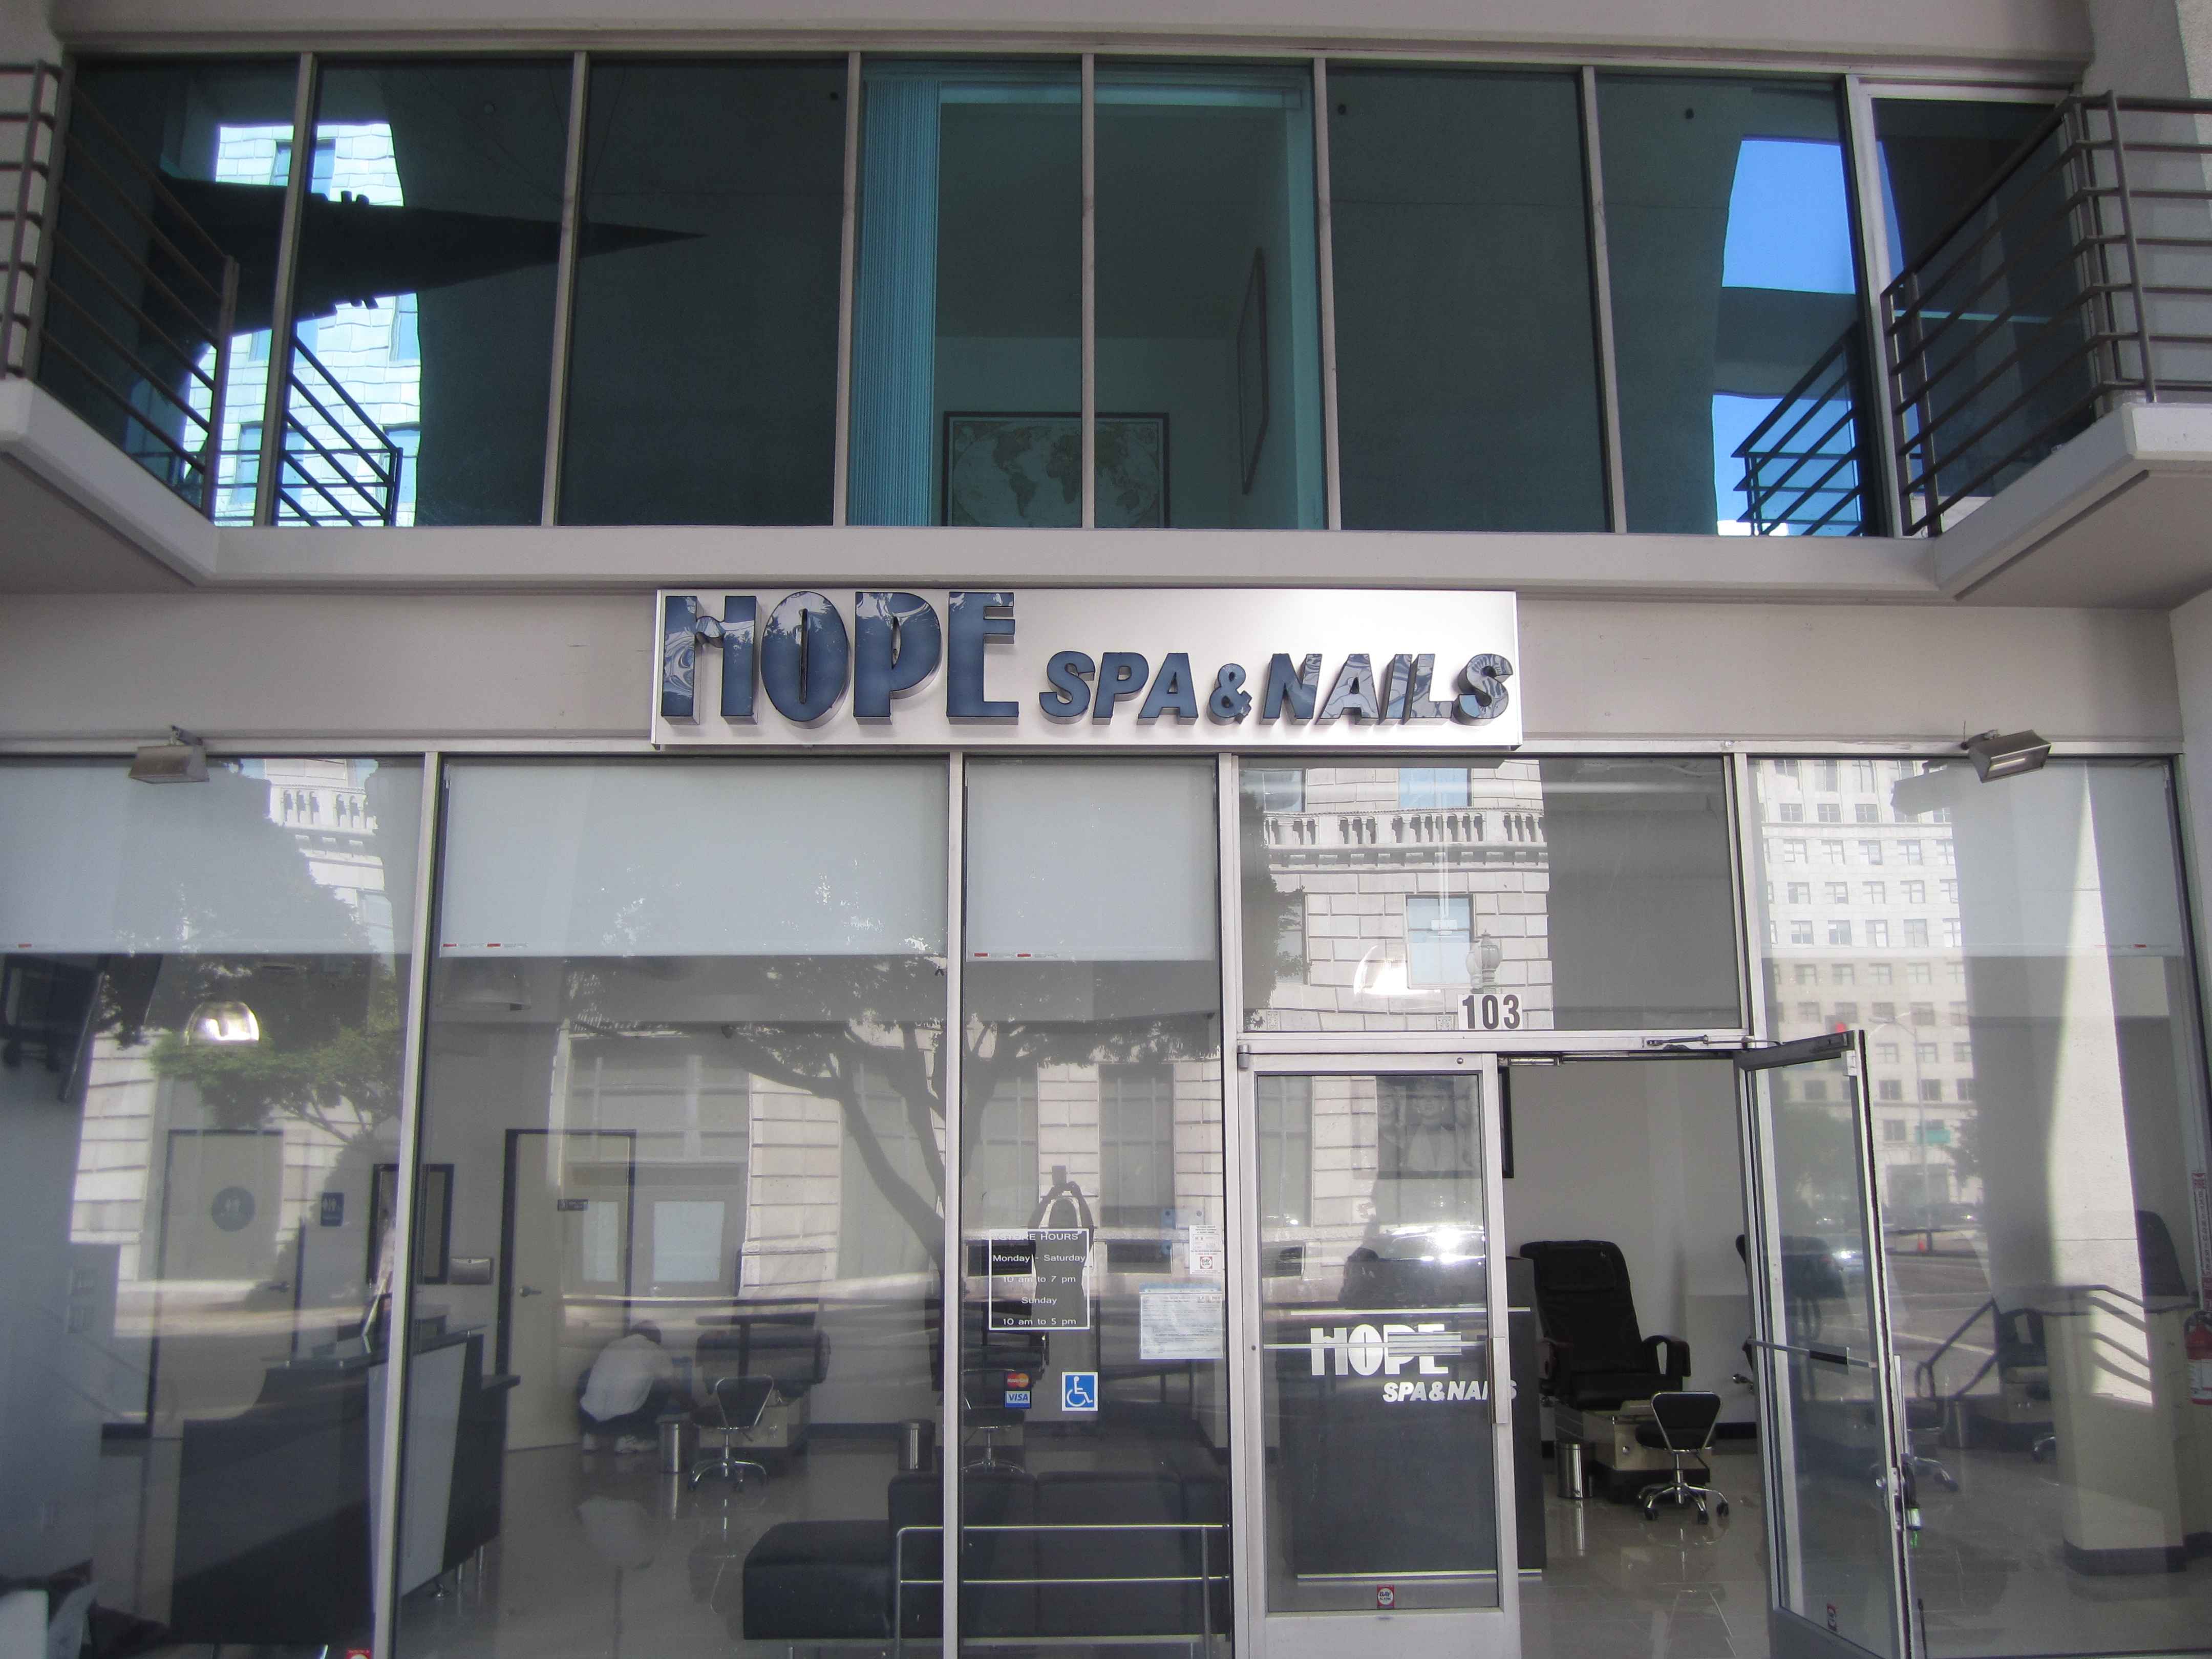 Project Commerical Hope Spa Los Angeles (14)